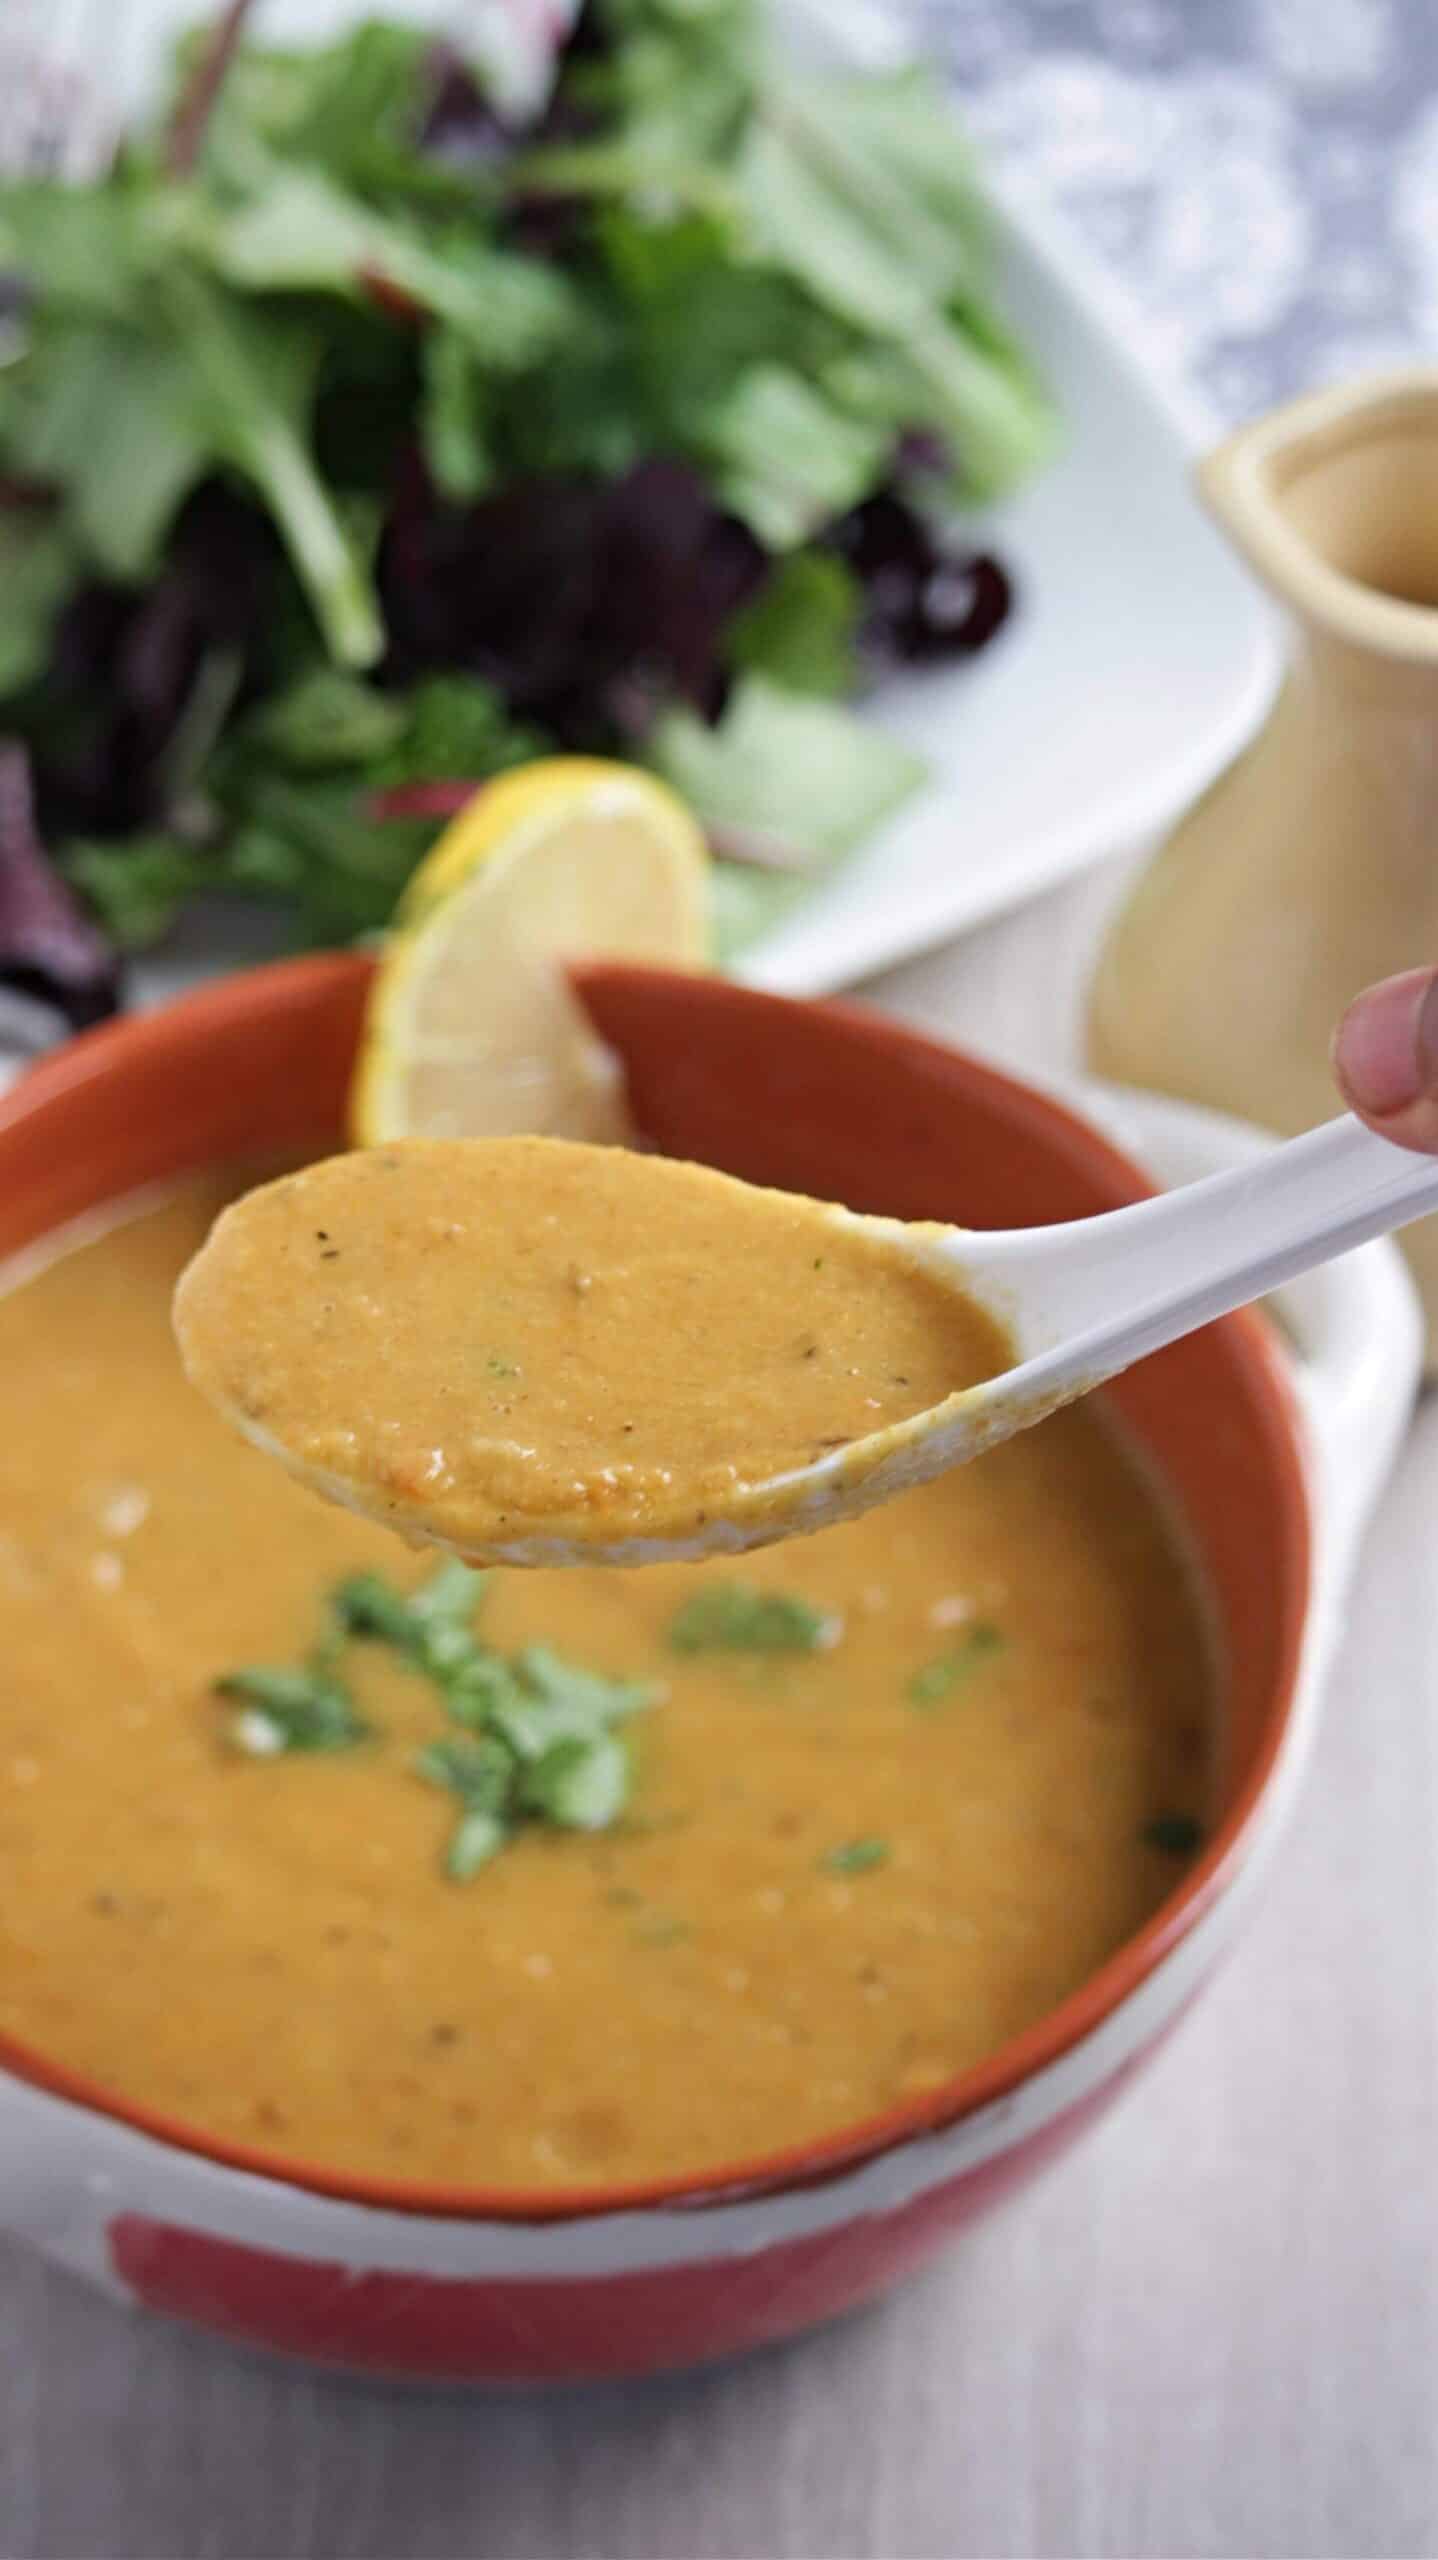 Vegan and Gluten free soup scooped in a spoon